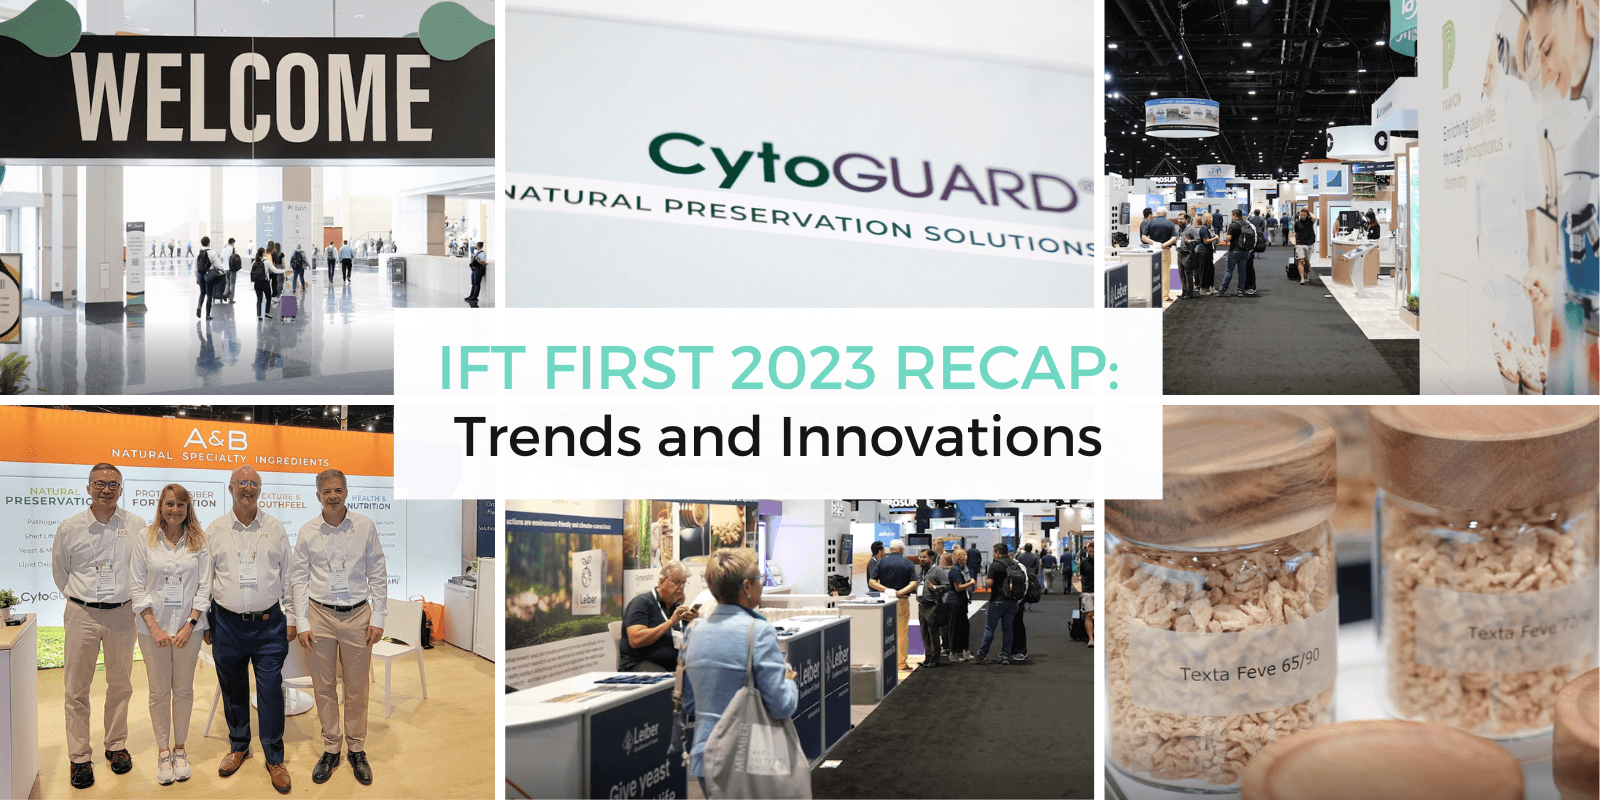 IFT FIRST 2023 Recap: Top Trends and Ingredient Innovations